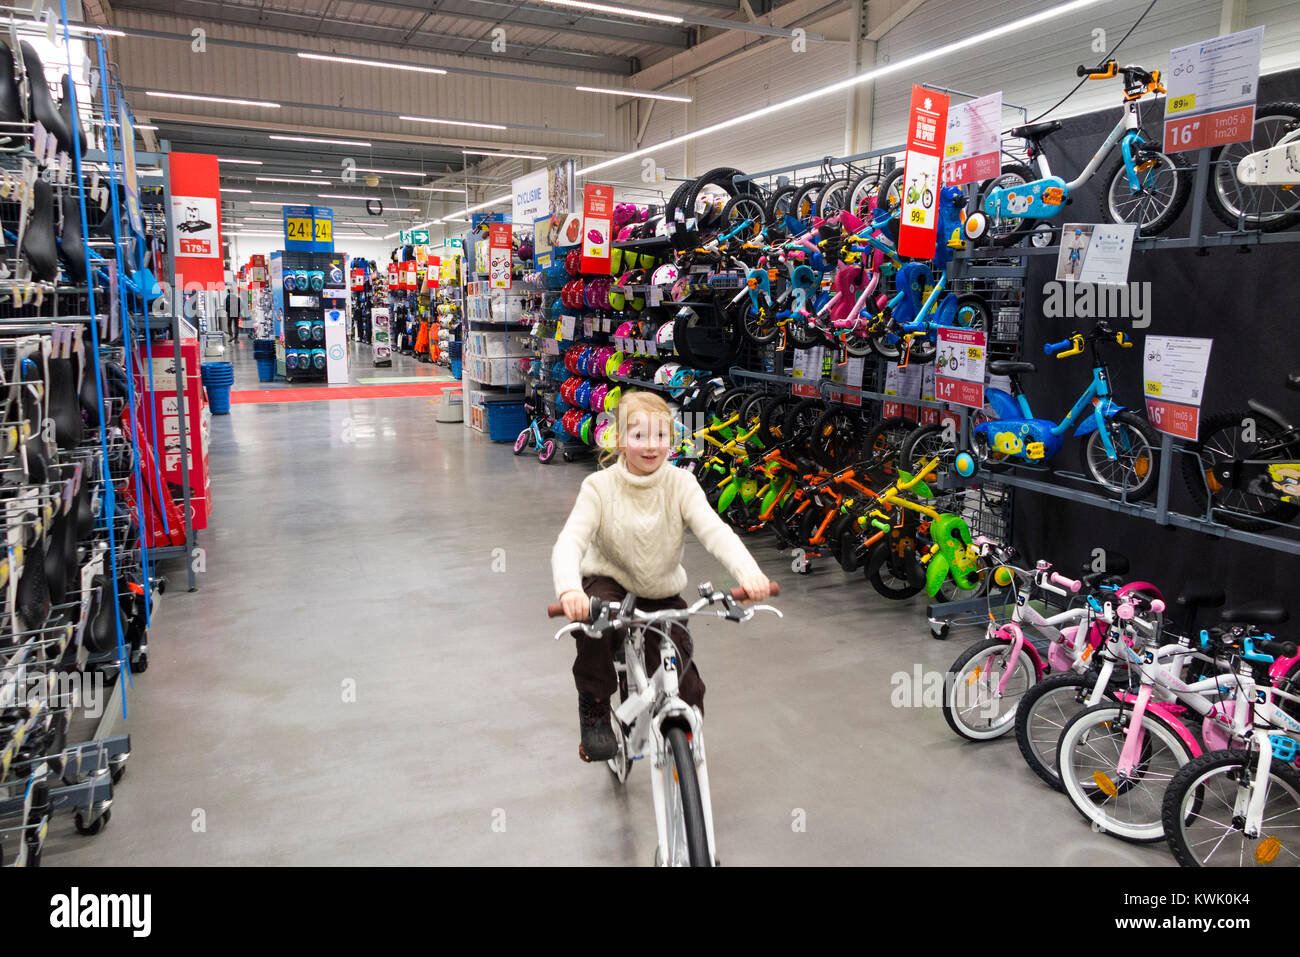 Children ride new bikes on sale in Decathlon store / shop / sports equipment retailer in France / French superstore at Grésy-sur-Aix